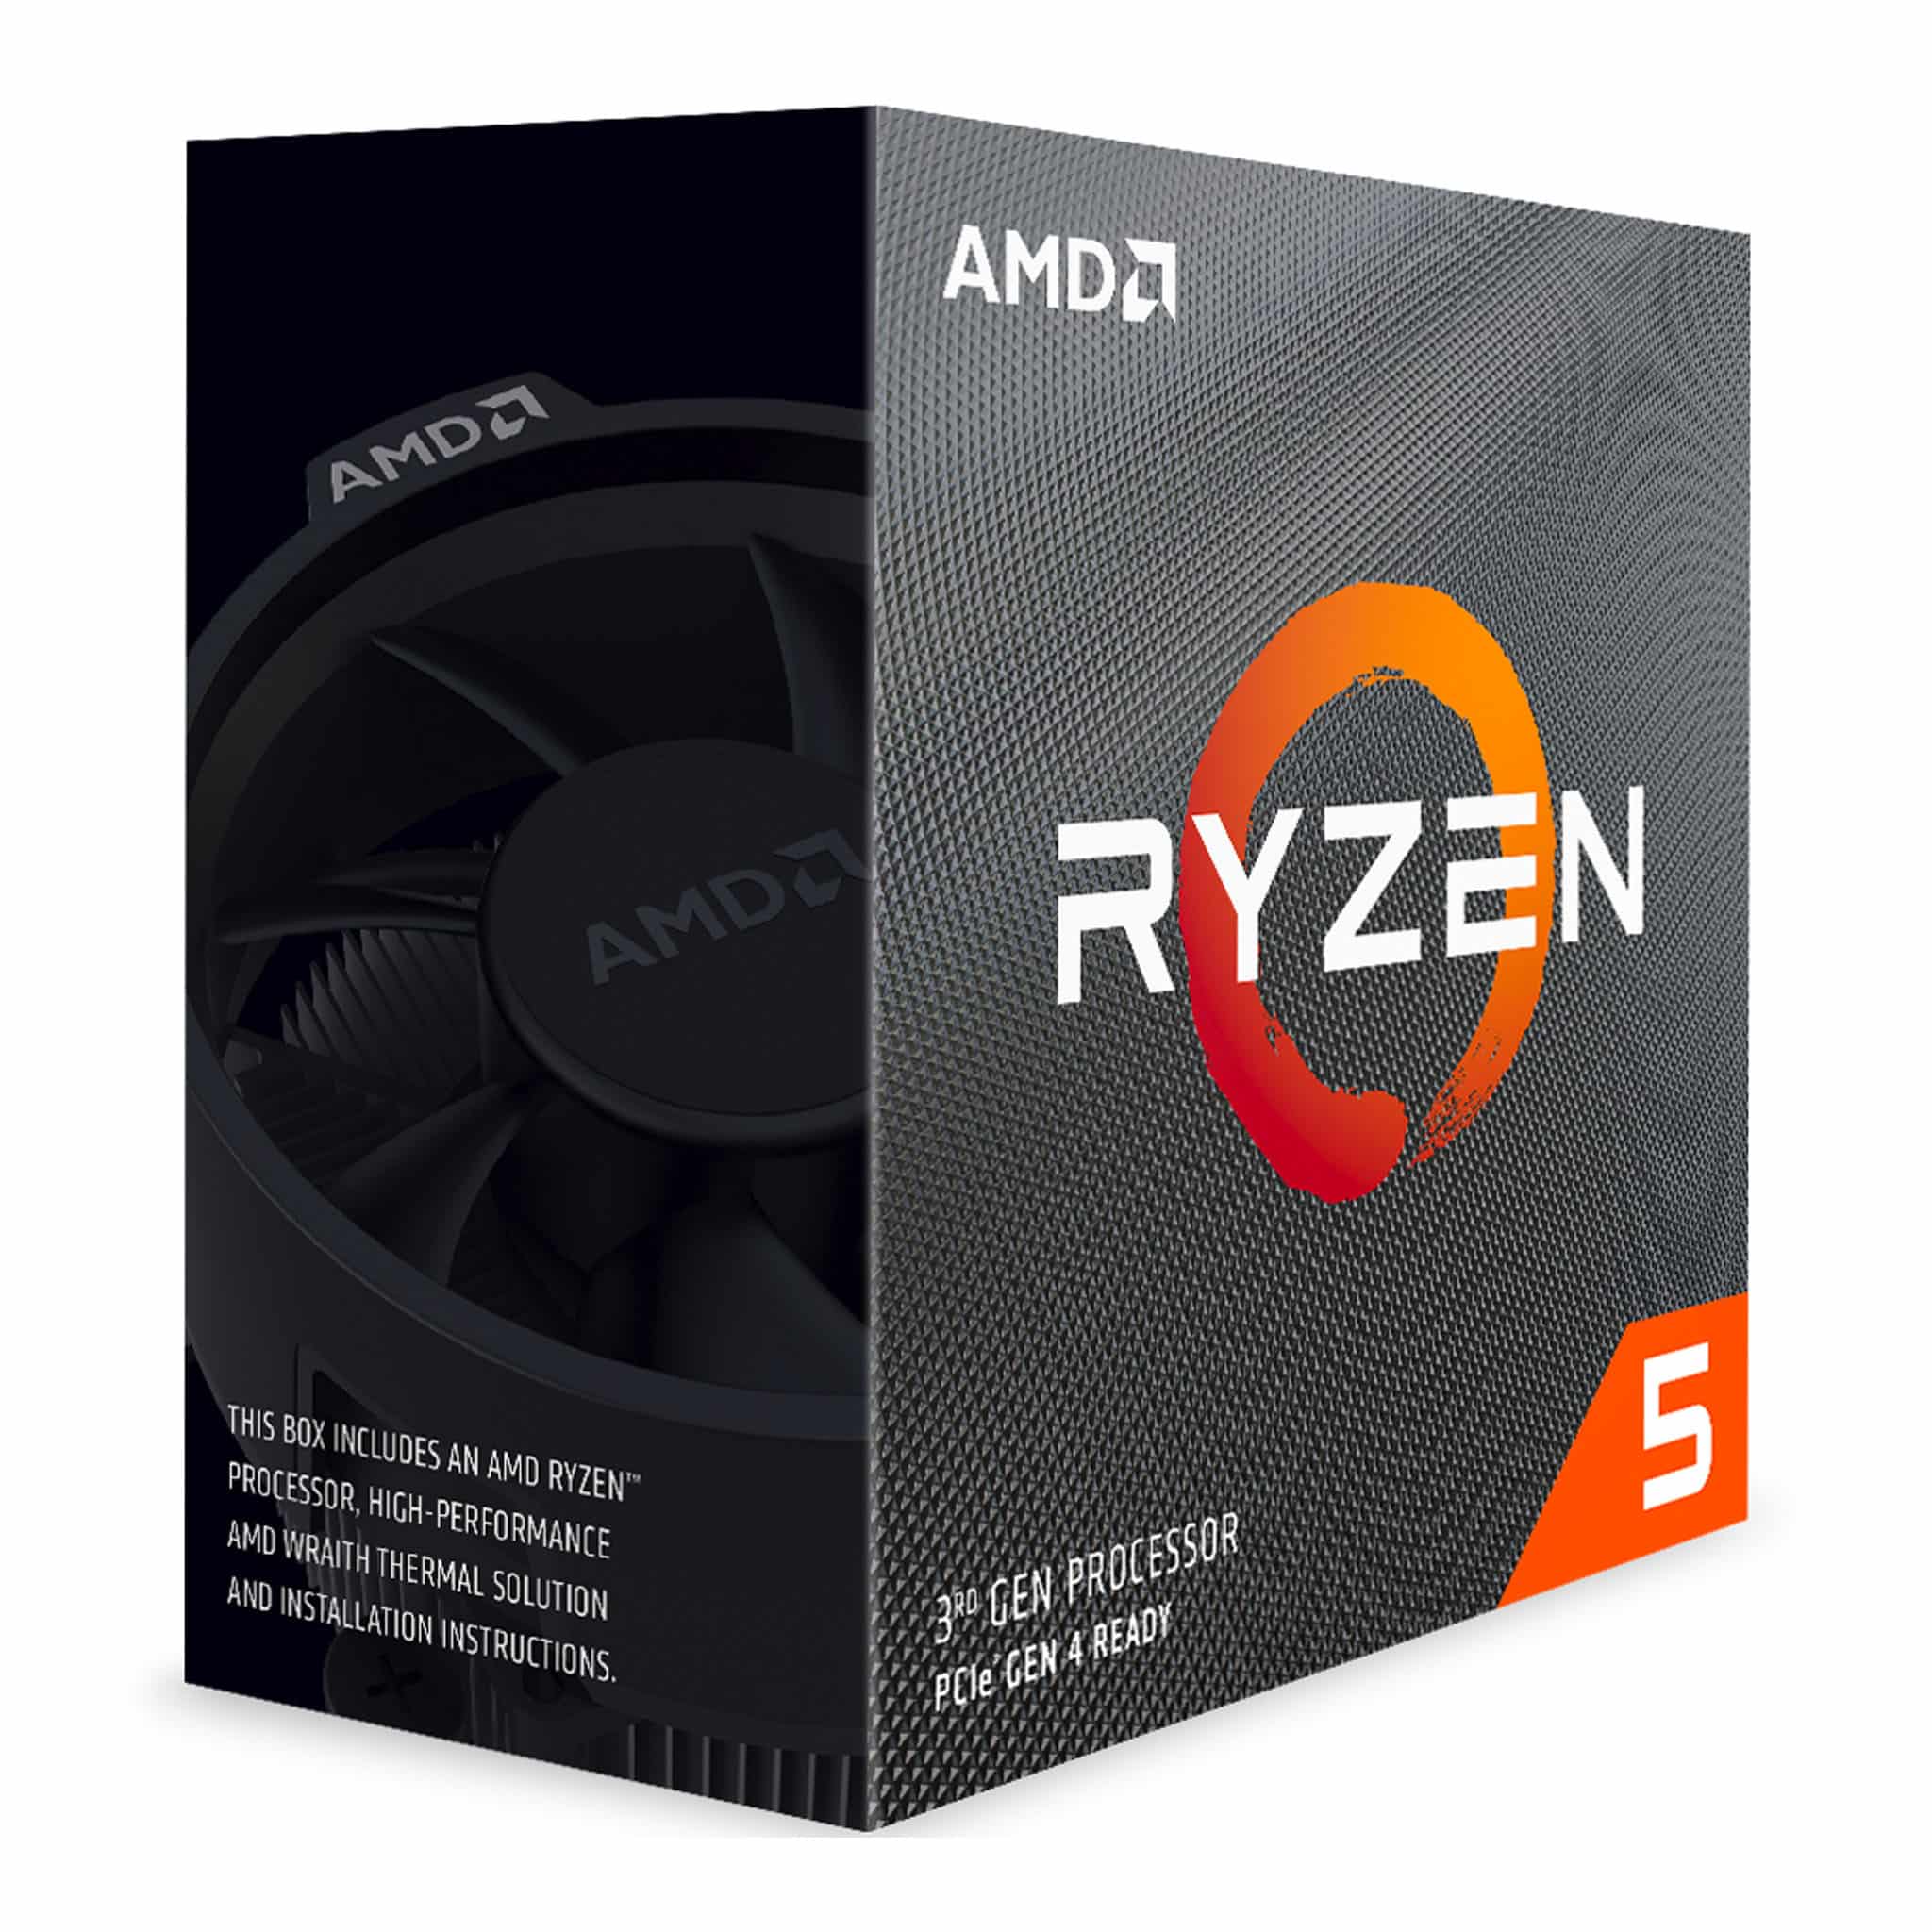 AMD Ryzen 5 3600 6 Core AM4 3.60 GHz Unlocked CPU Processor (4.2 GHz Max Boost) With Wraith Stealth